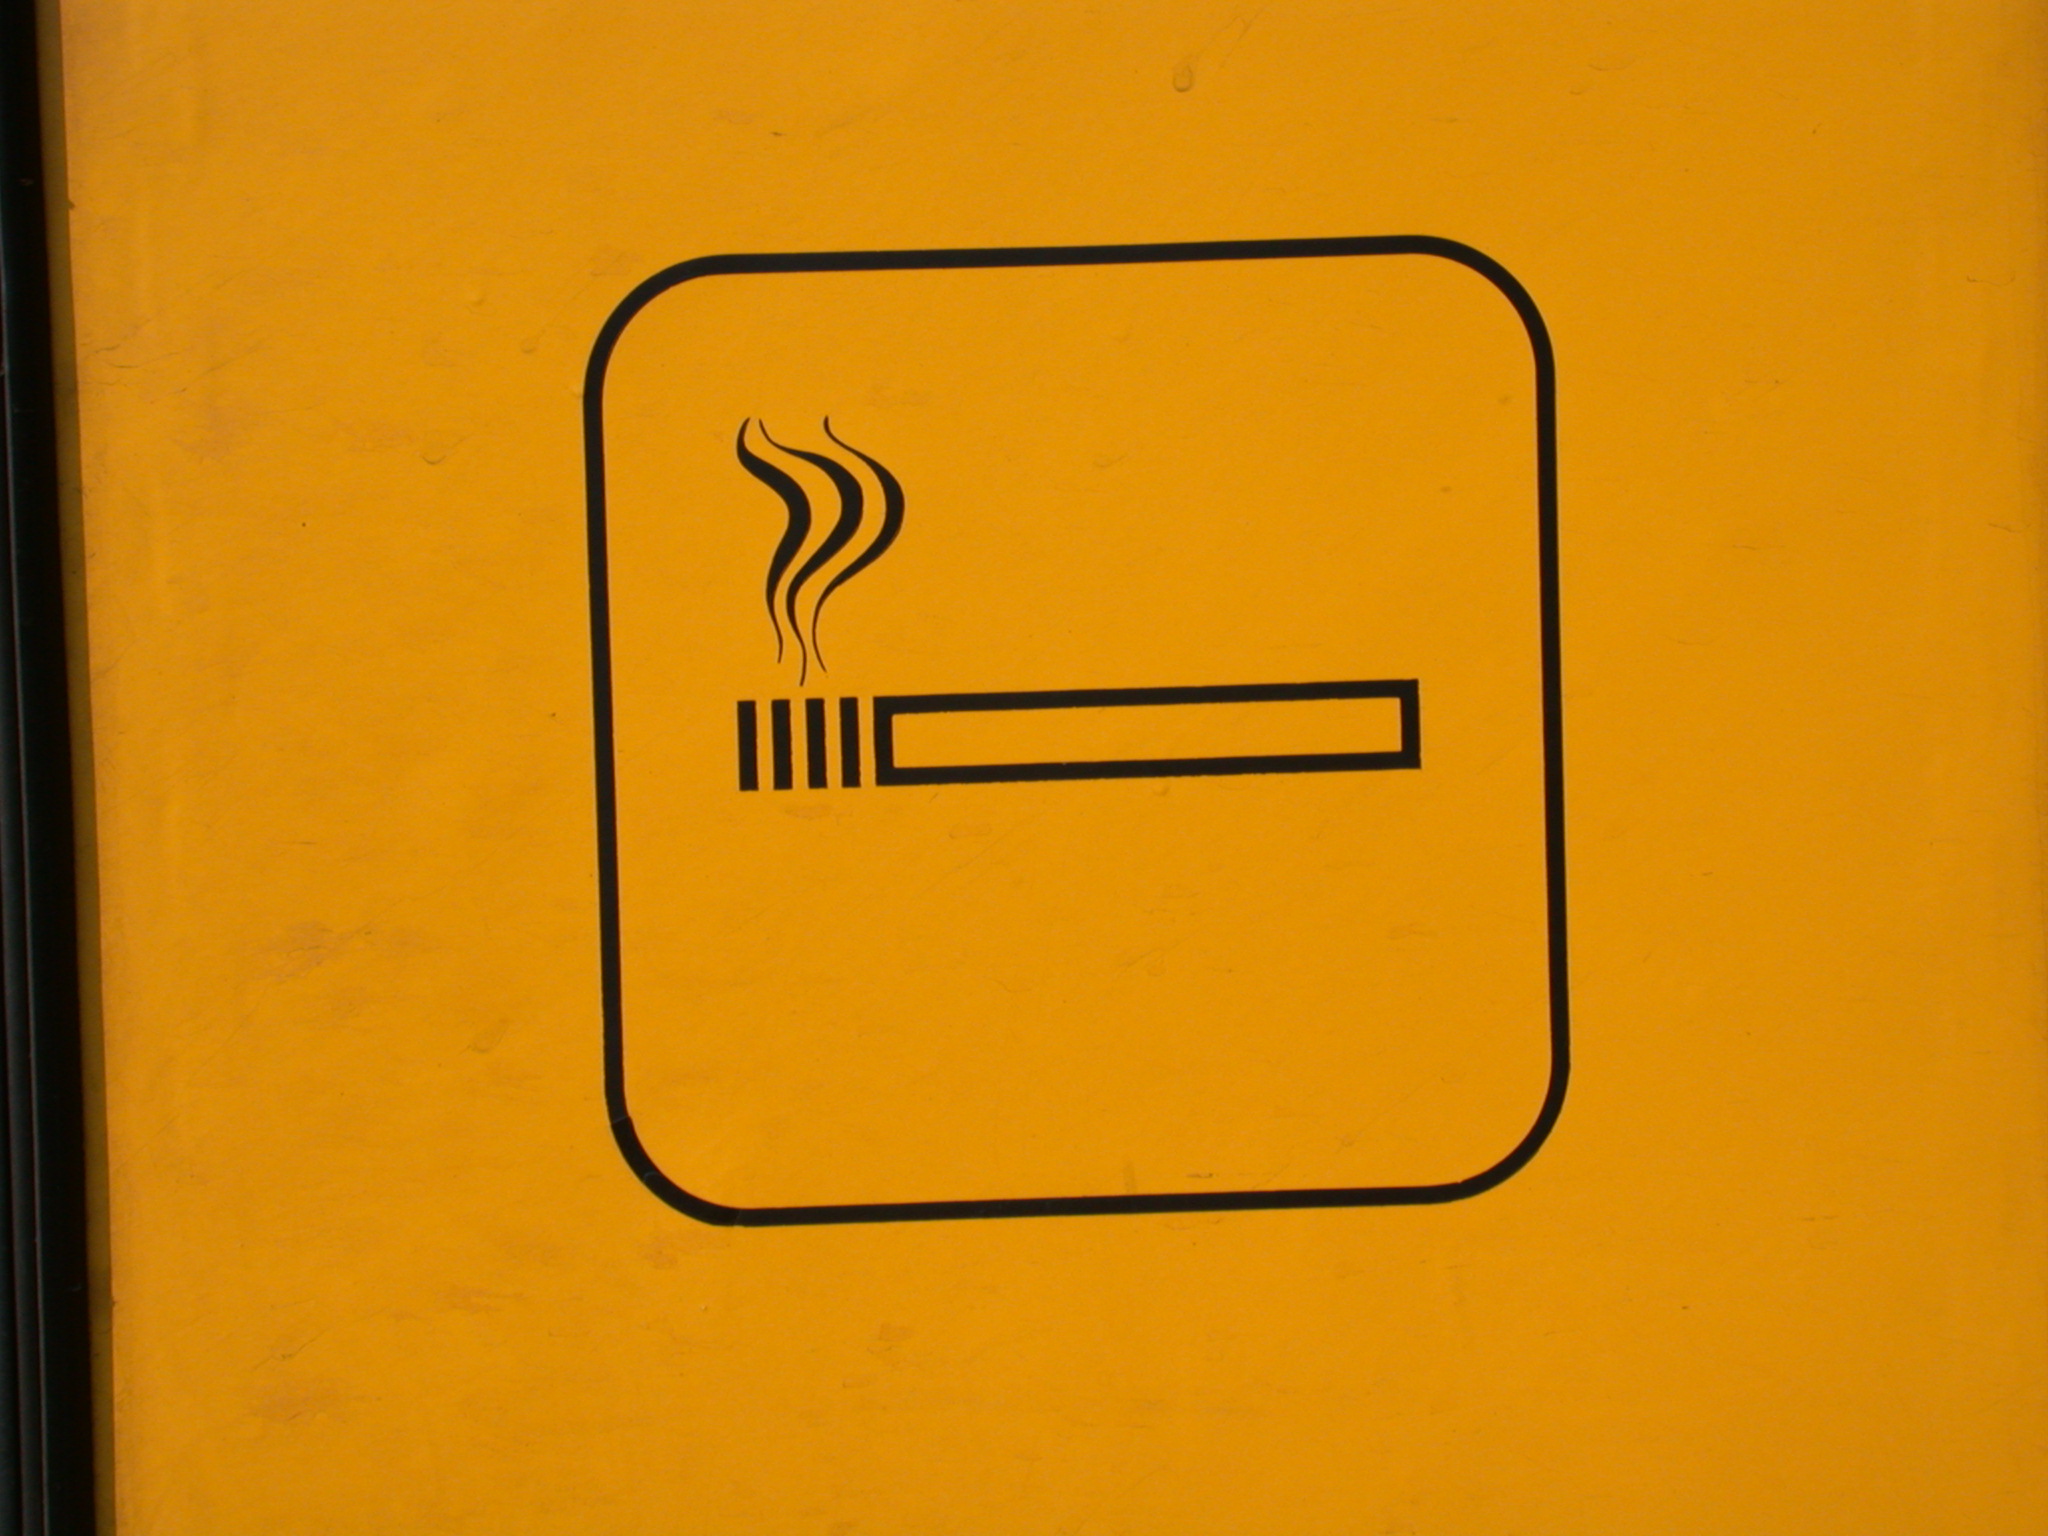 objects signs cigarette smoking smoke pictogram yellow ns